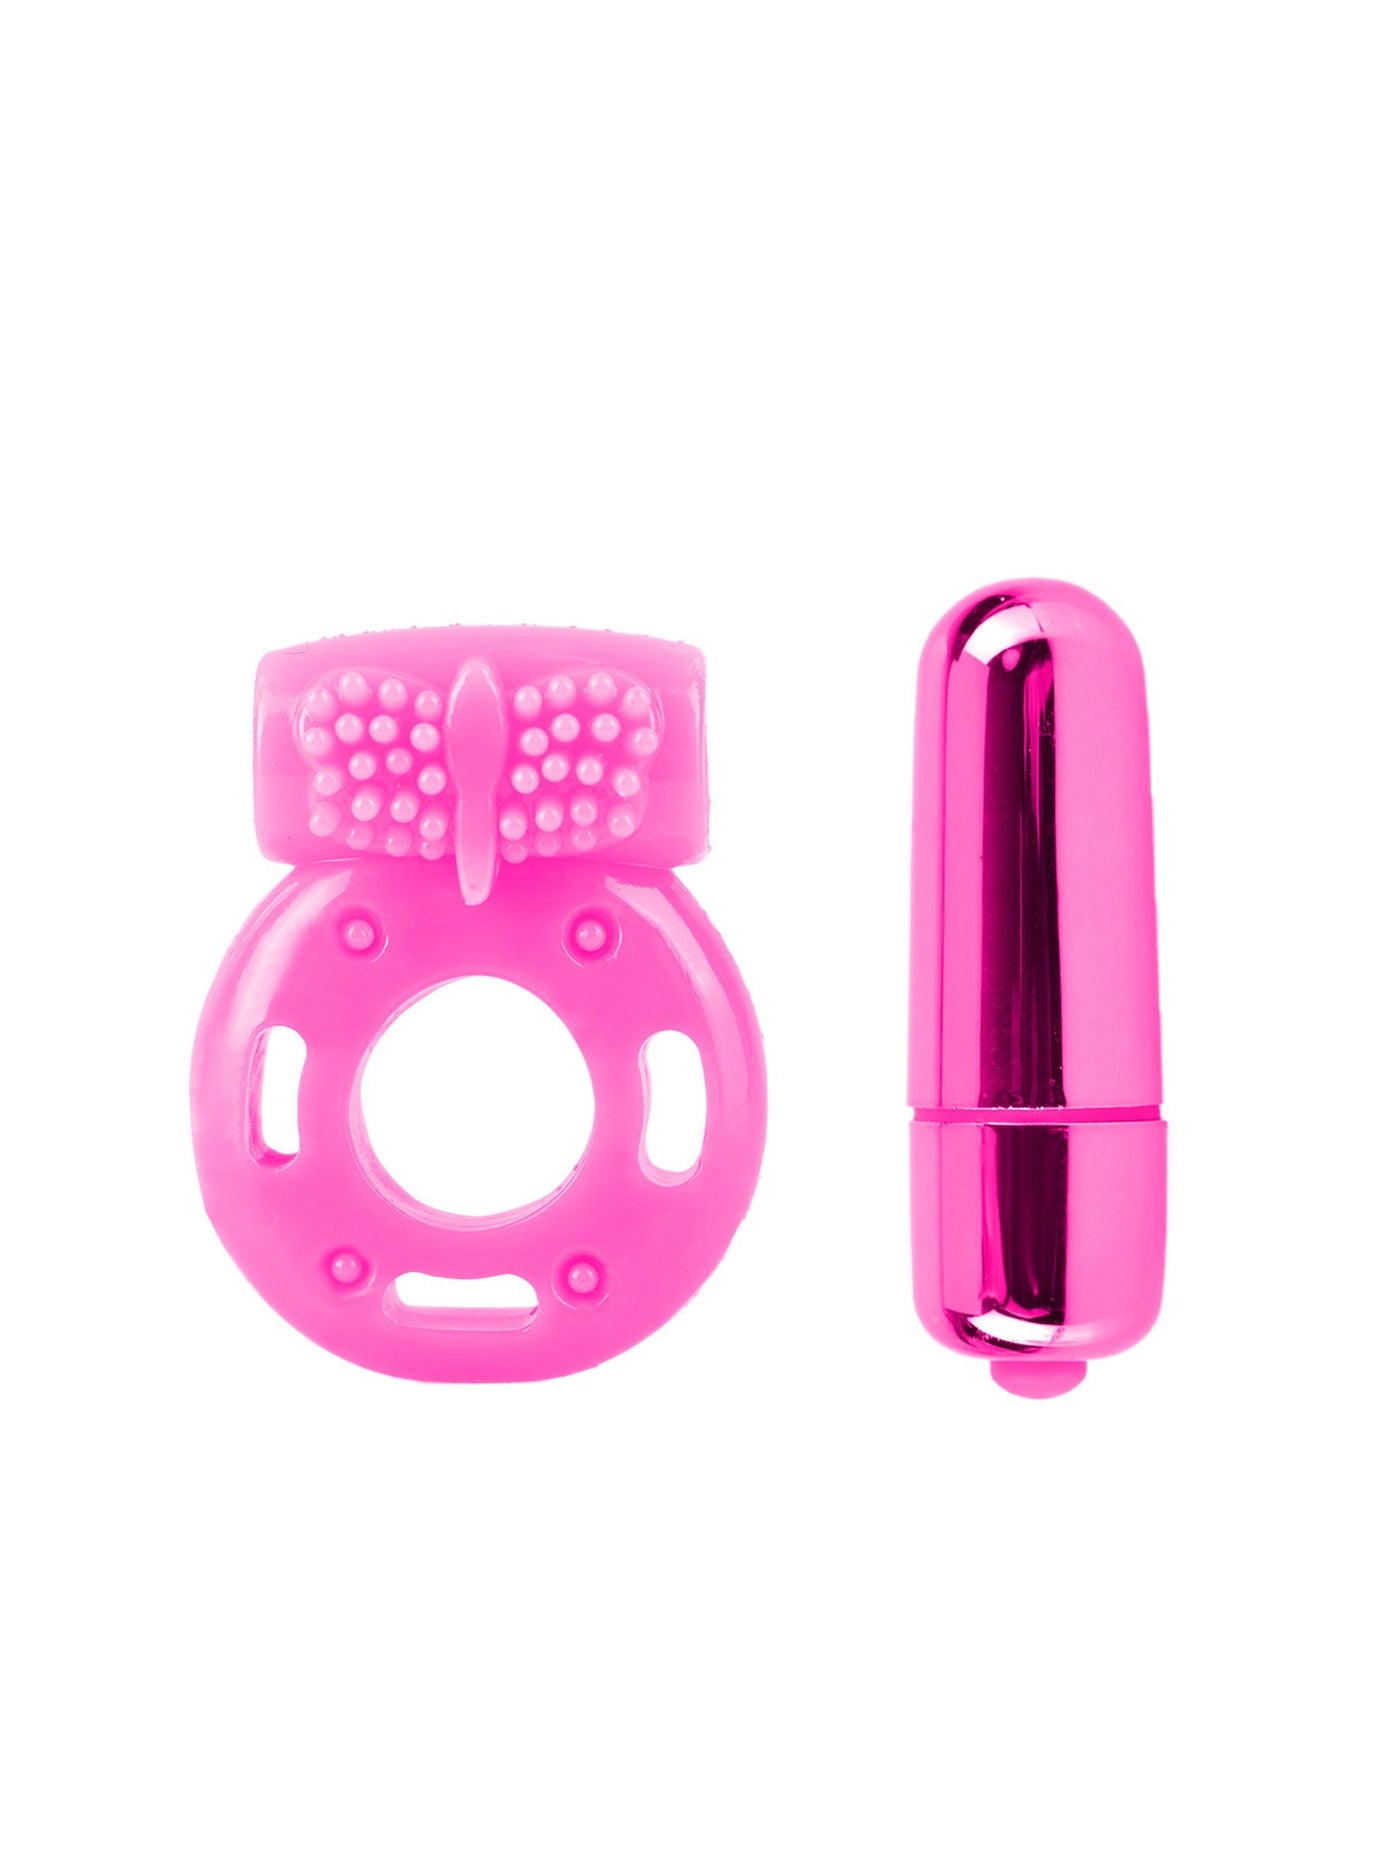 NEON Silicone Elite Vibrating Couples Kit More Toys Pipedream Products Pink